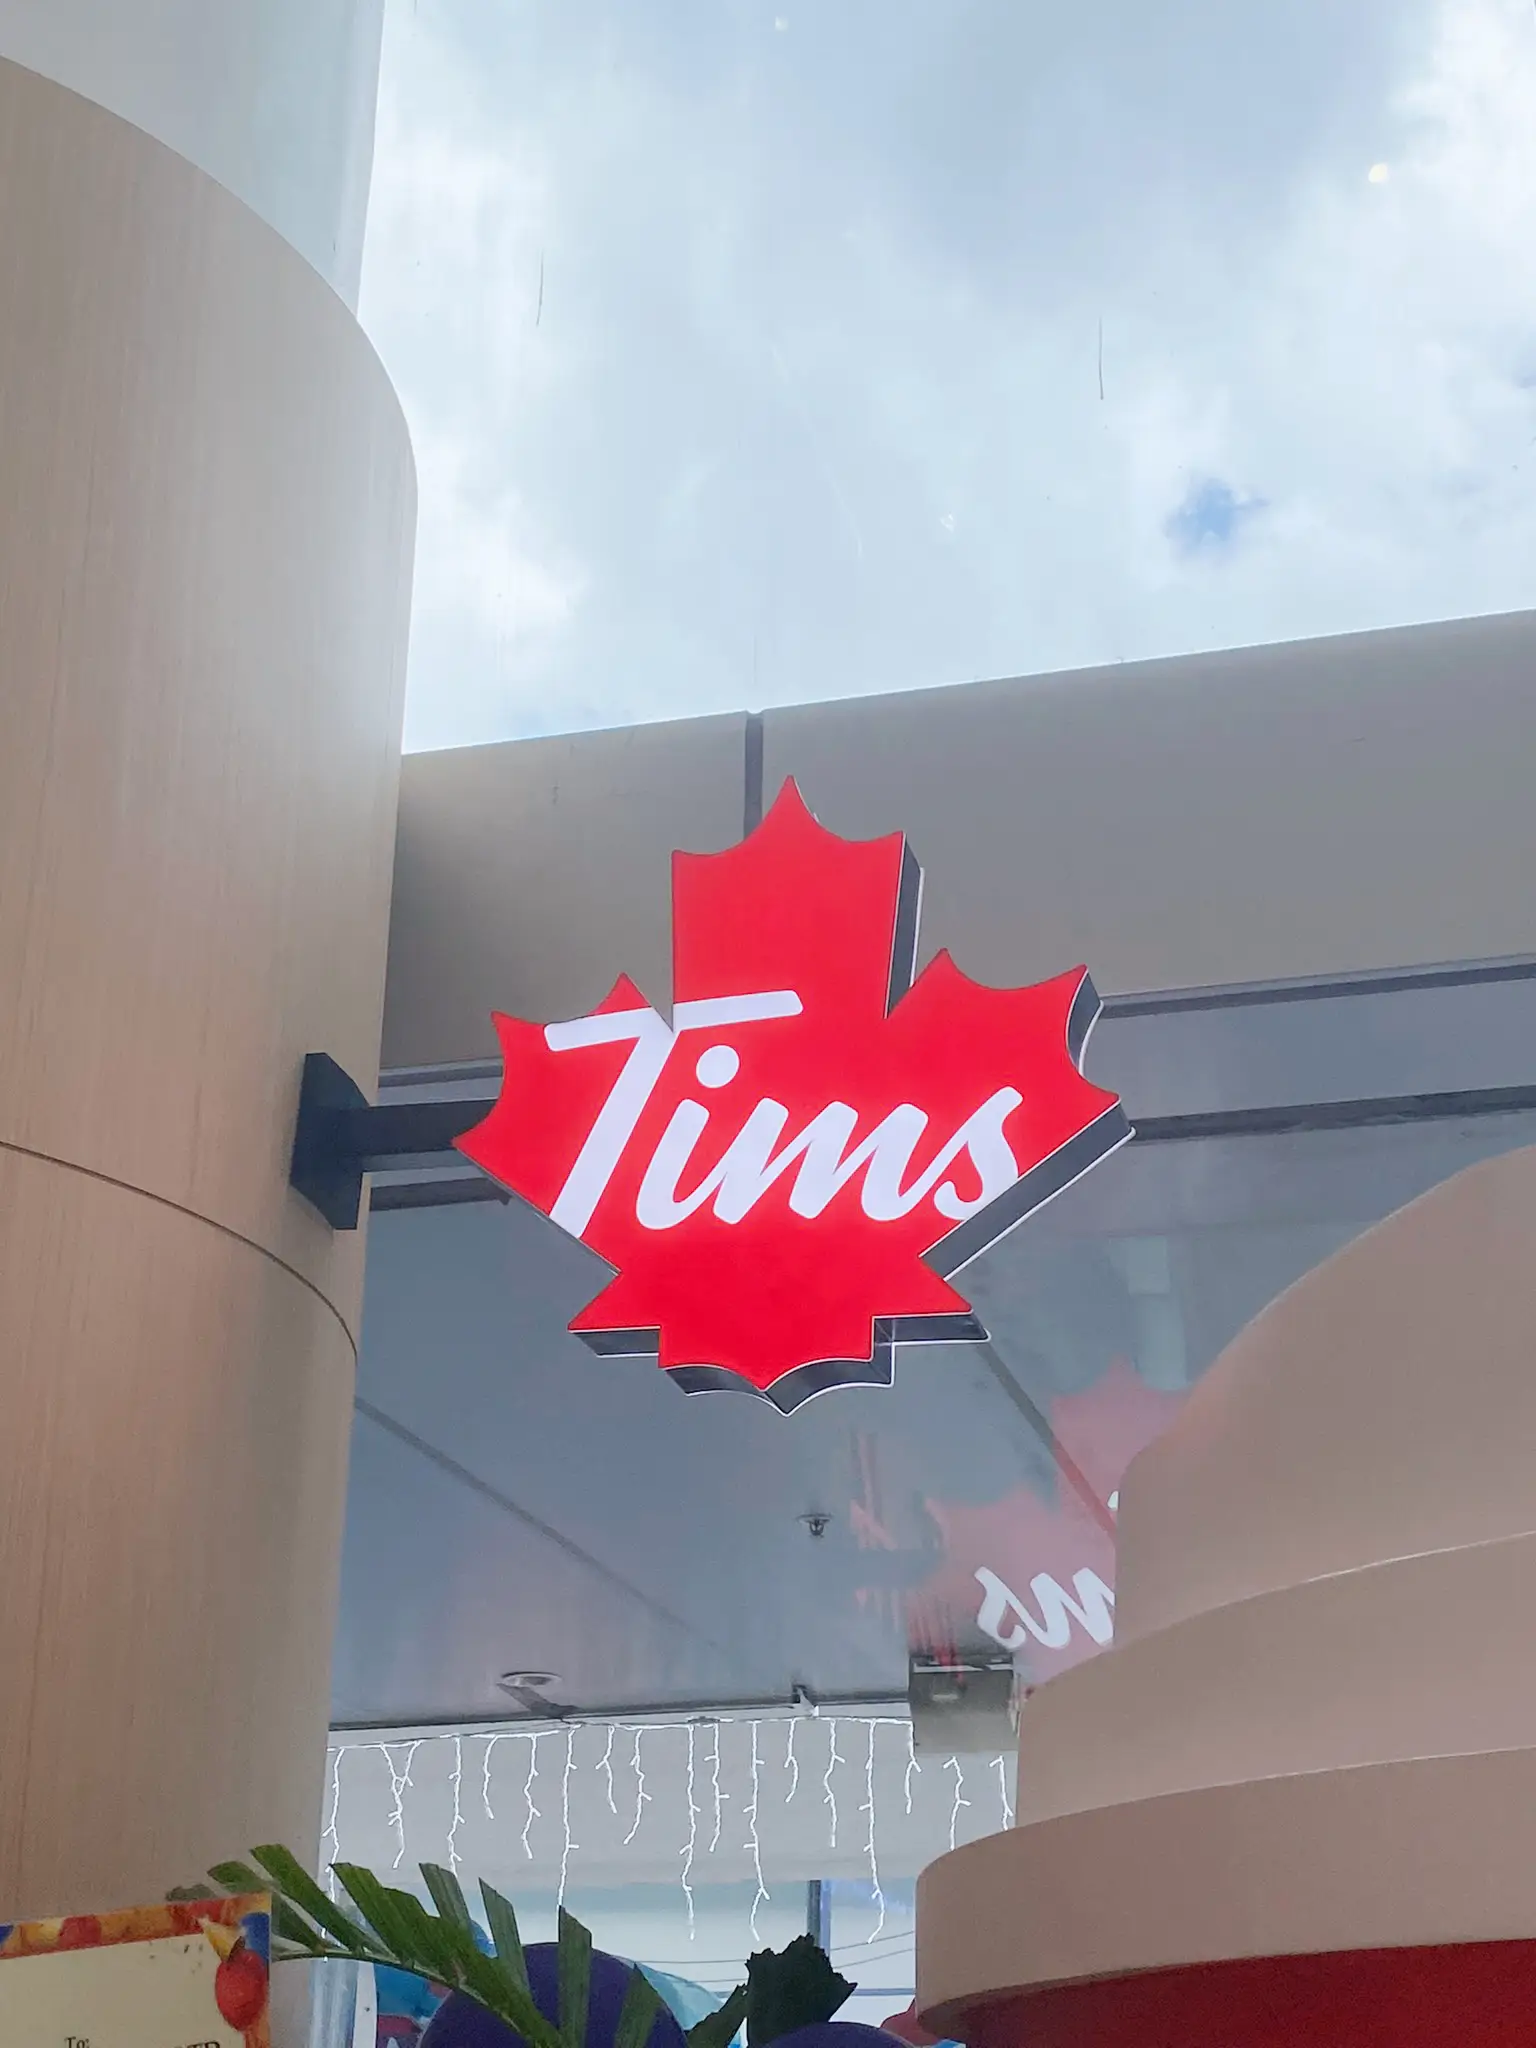 Canadian cafe chain Tim Hortons debuts in Singapore - Inside Retail Asia